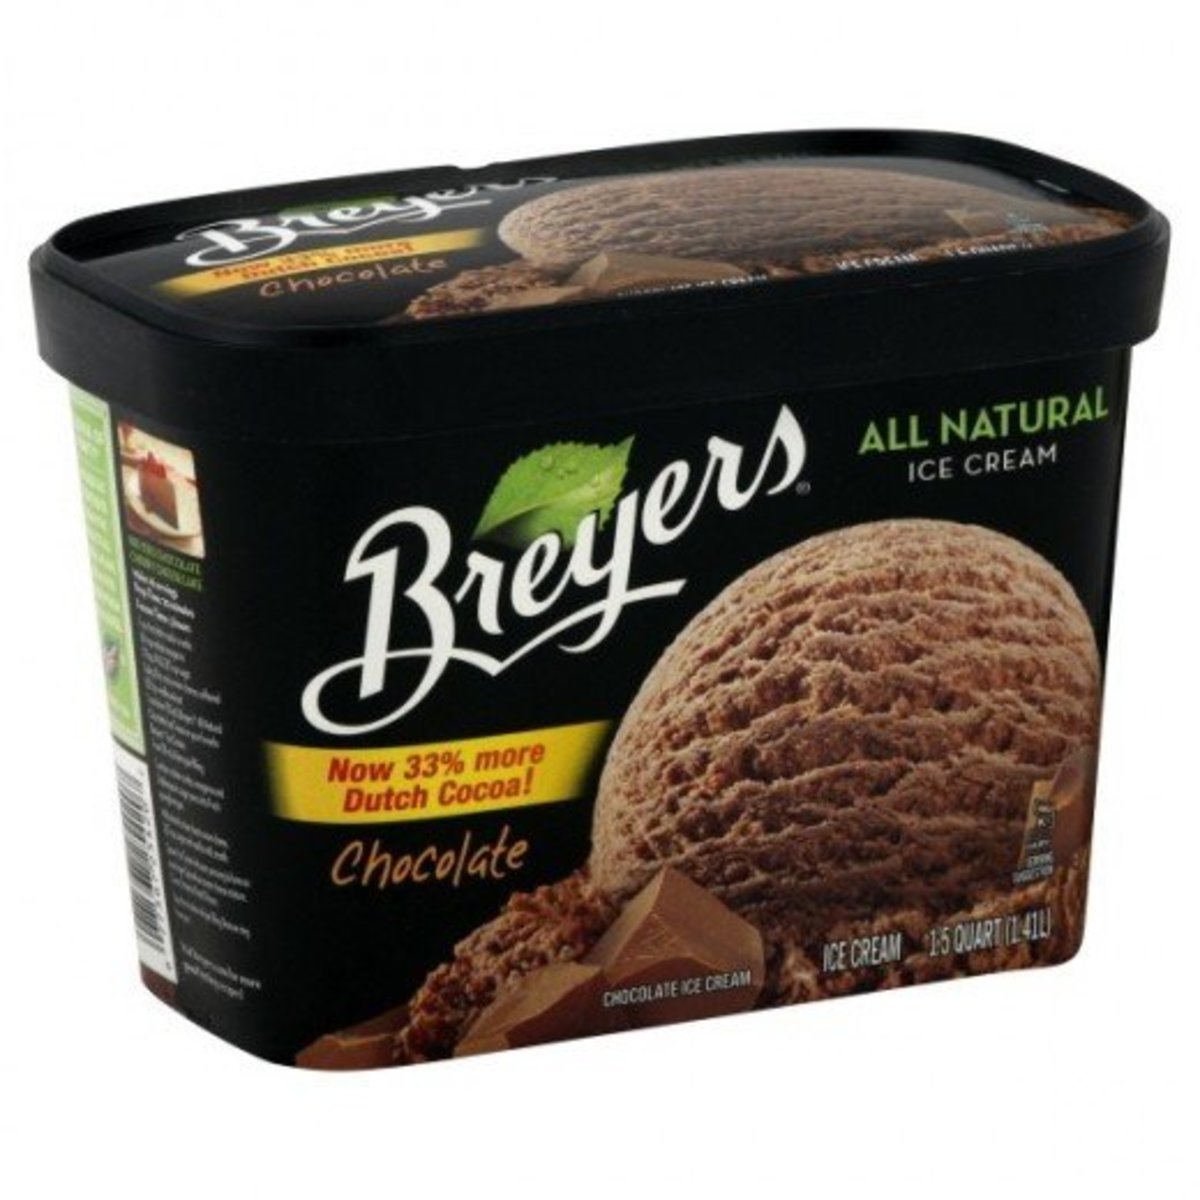 Aldi ice cream is terrible, but Harris Teeter All Natural Ice Cream is remarkably similar to Breyers, including the 5 or 6-item ingredient list.